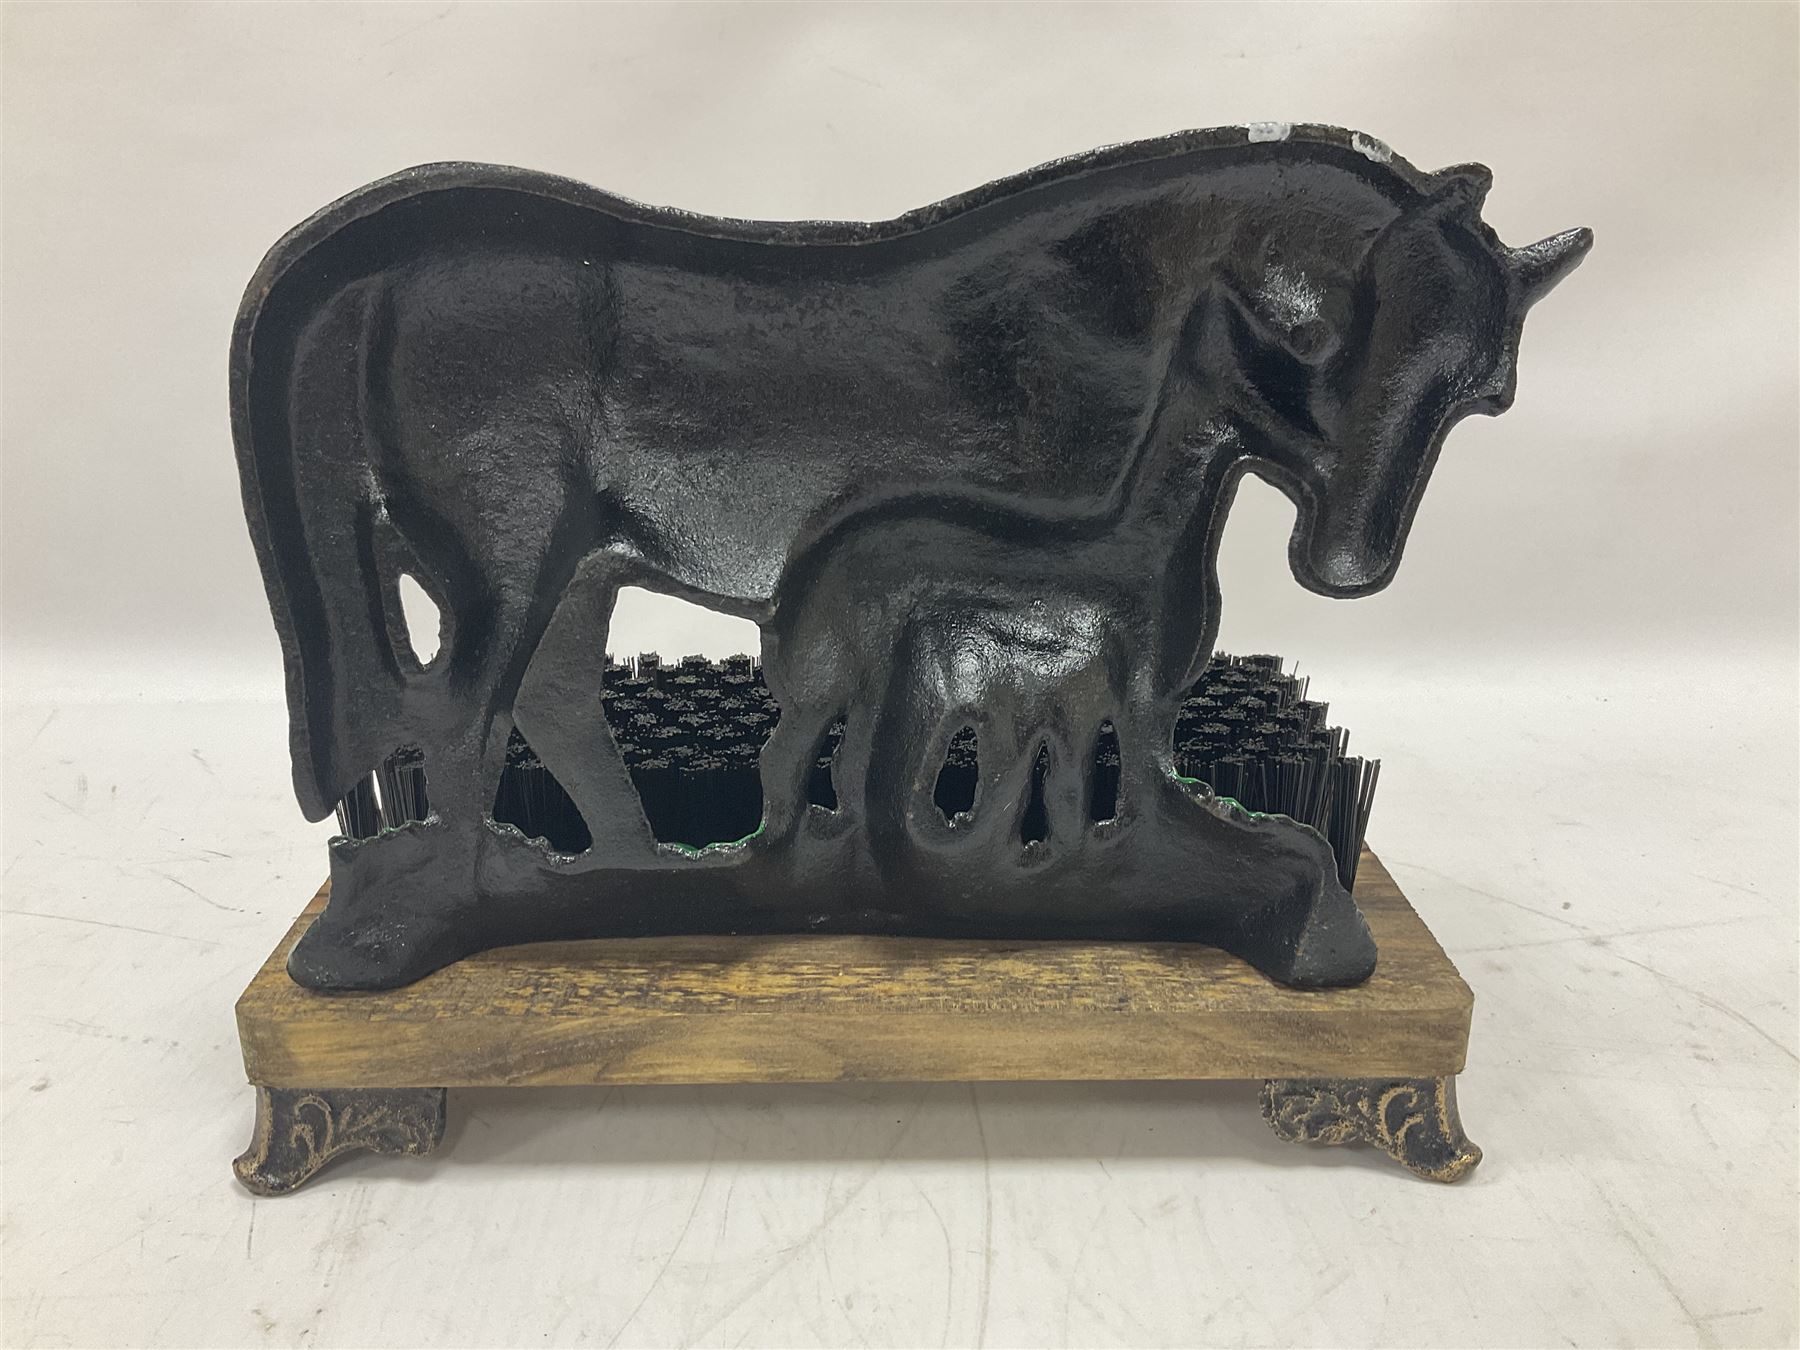 Cast iron horse and foal boot brush on wooden base - Image 3 of 4